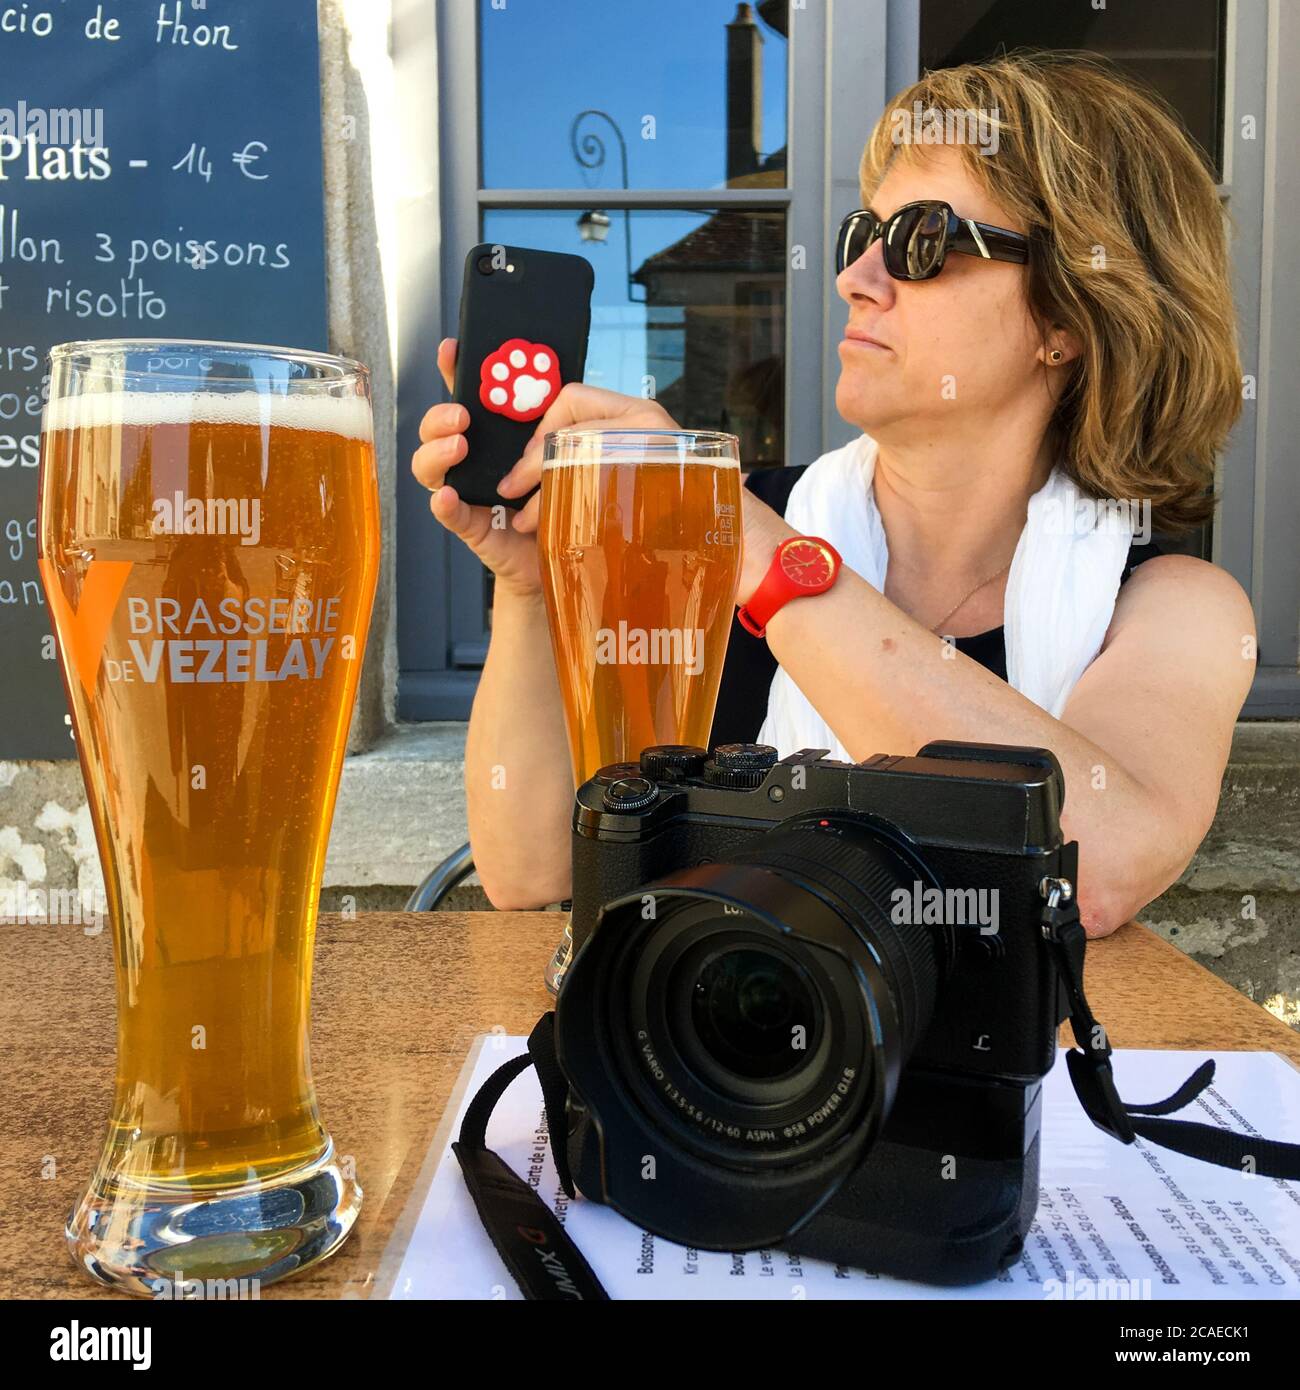 Digital camera, glasses of beer and good looking mature friend, illustration for a photographer's way of life, Vezelay, Yonne, Bourgogne Franche-Comté, France Stock Photo